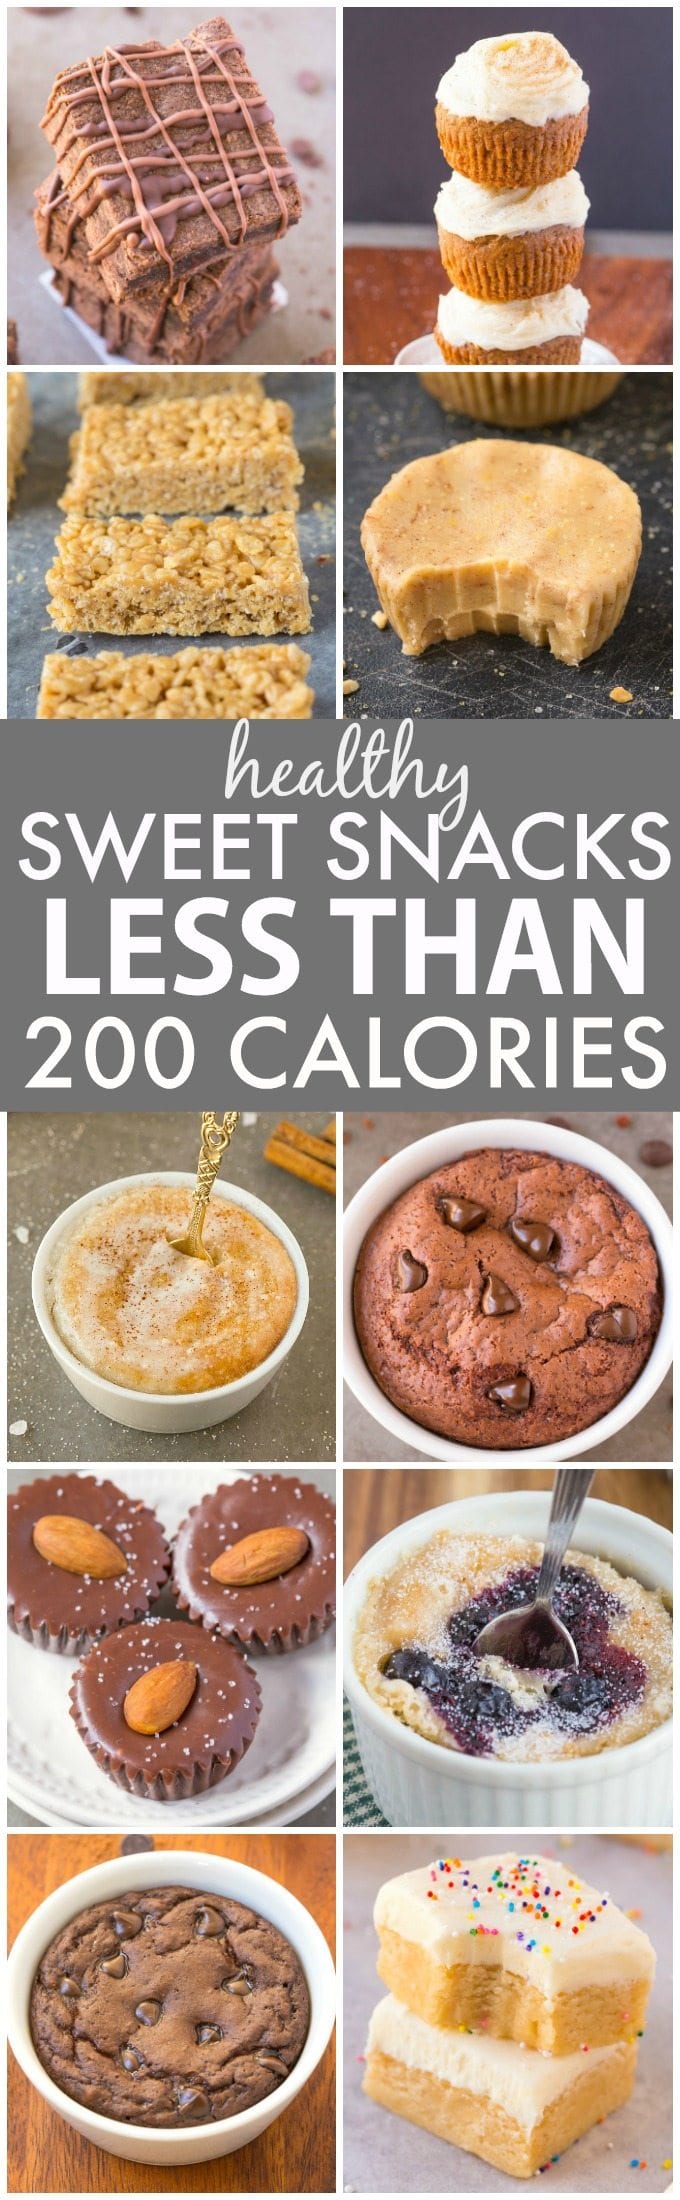 Healthy Clean Eating 200 Calorie or less Snacks, desserts, and treats! (V, GF, Paleo)- The BEST satisfying and filling sweet snacks and treats LESS than 200 calories and secretly healthy! Quick, easy and kid friendly- Brownies, bars, muffins, cakes and more! {vegan, gluten free, paleo, sugar free, dairy free, whole 30 recipe}- thebigmansworld.com